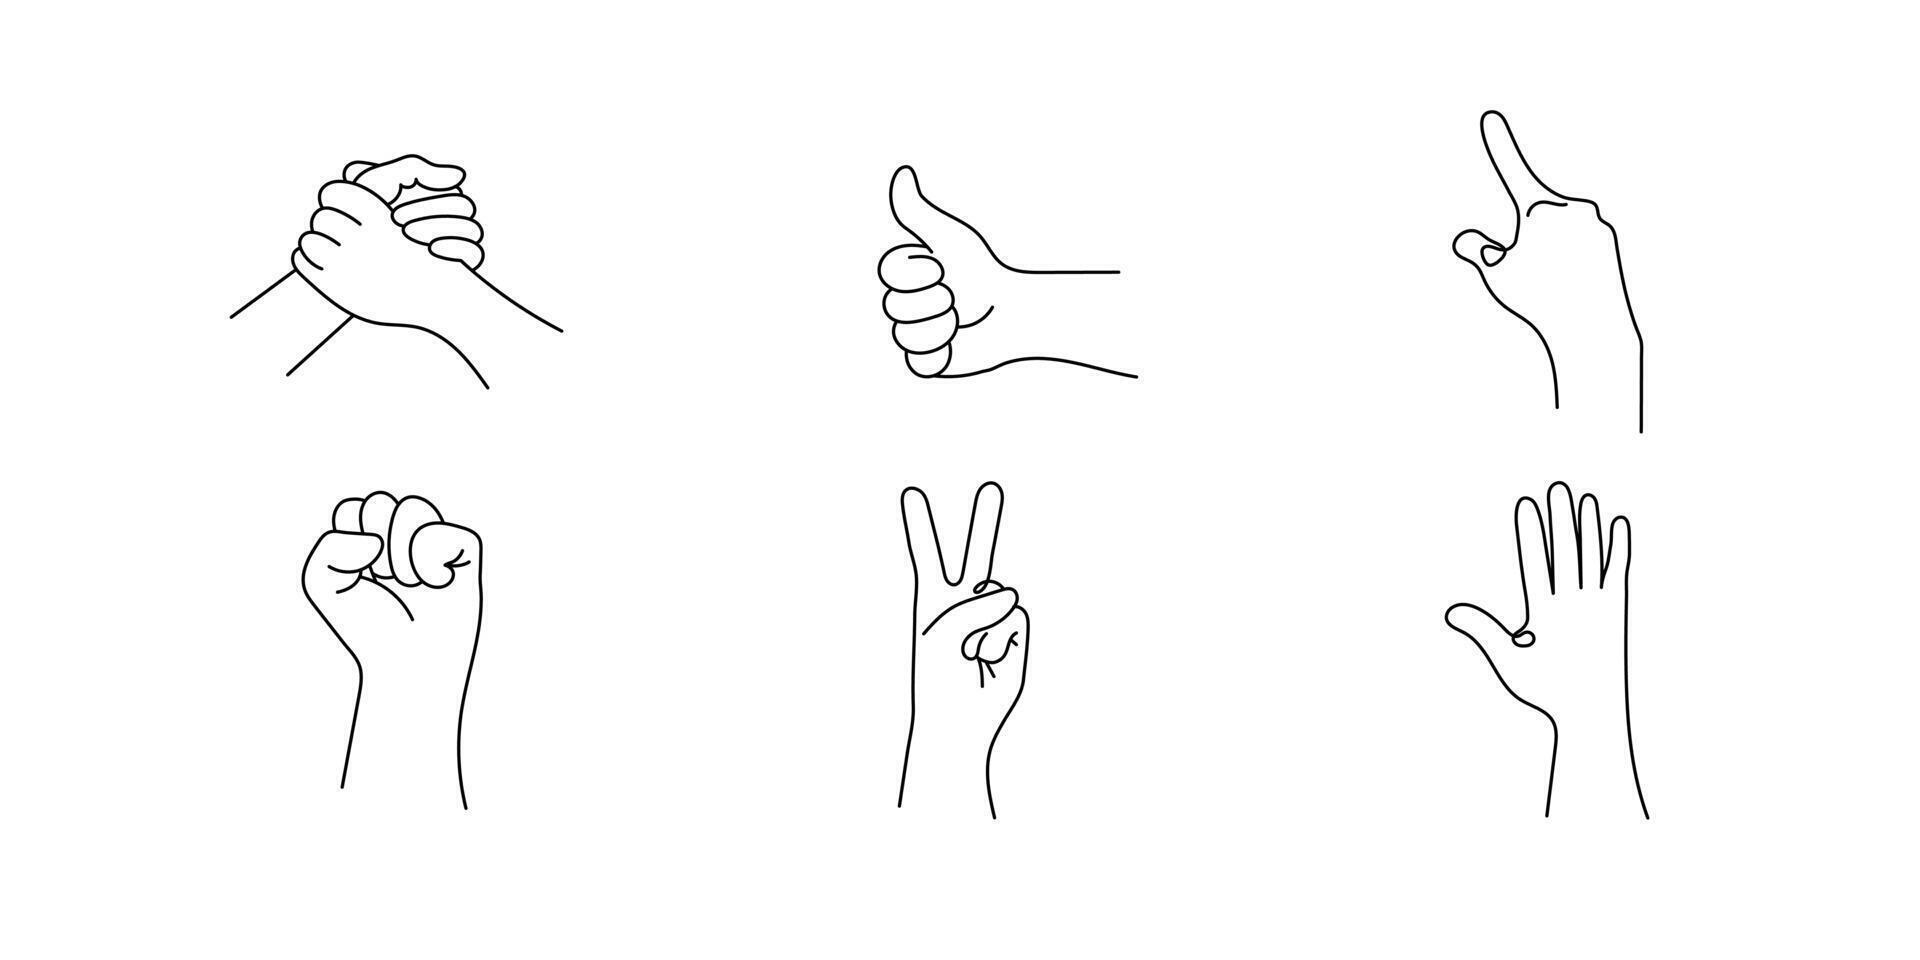 Set of realistic one line gestures. Graphic logo design with black line strokes on a white background. graphic. Hand gestures vector